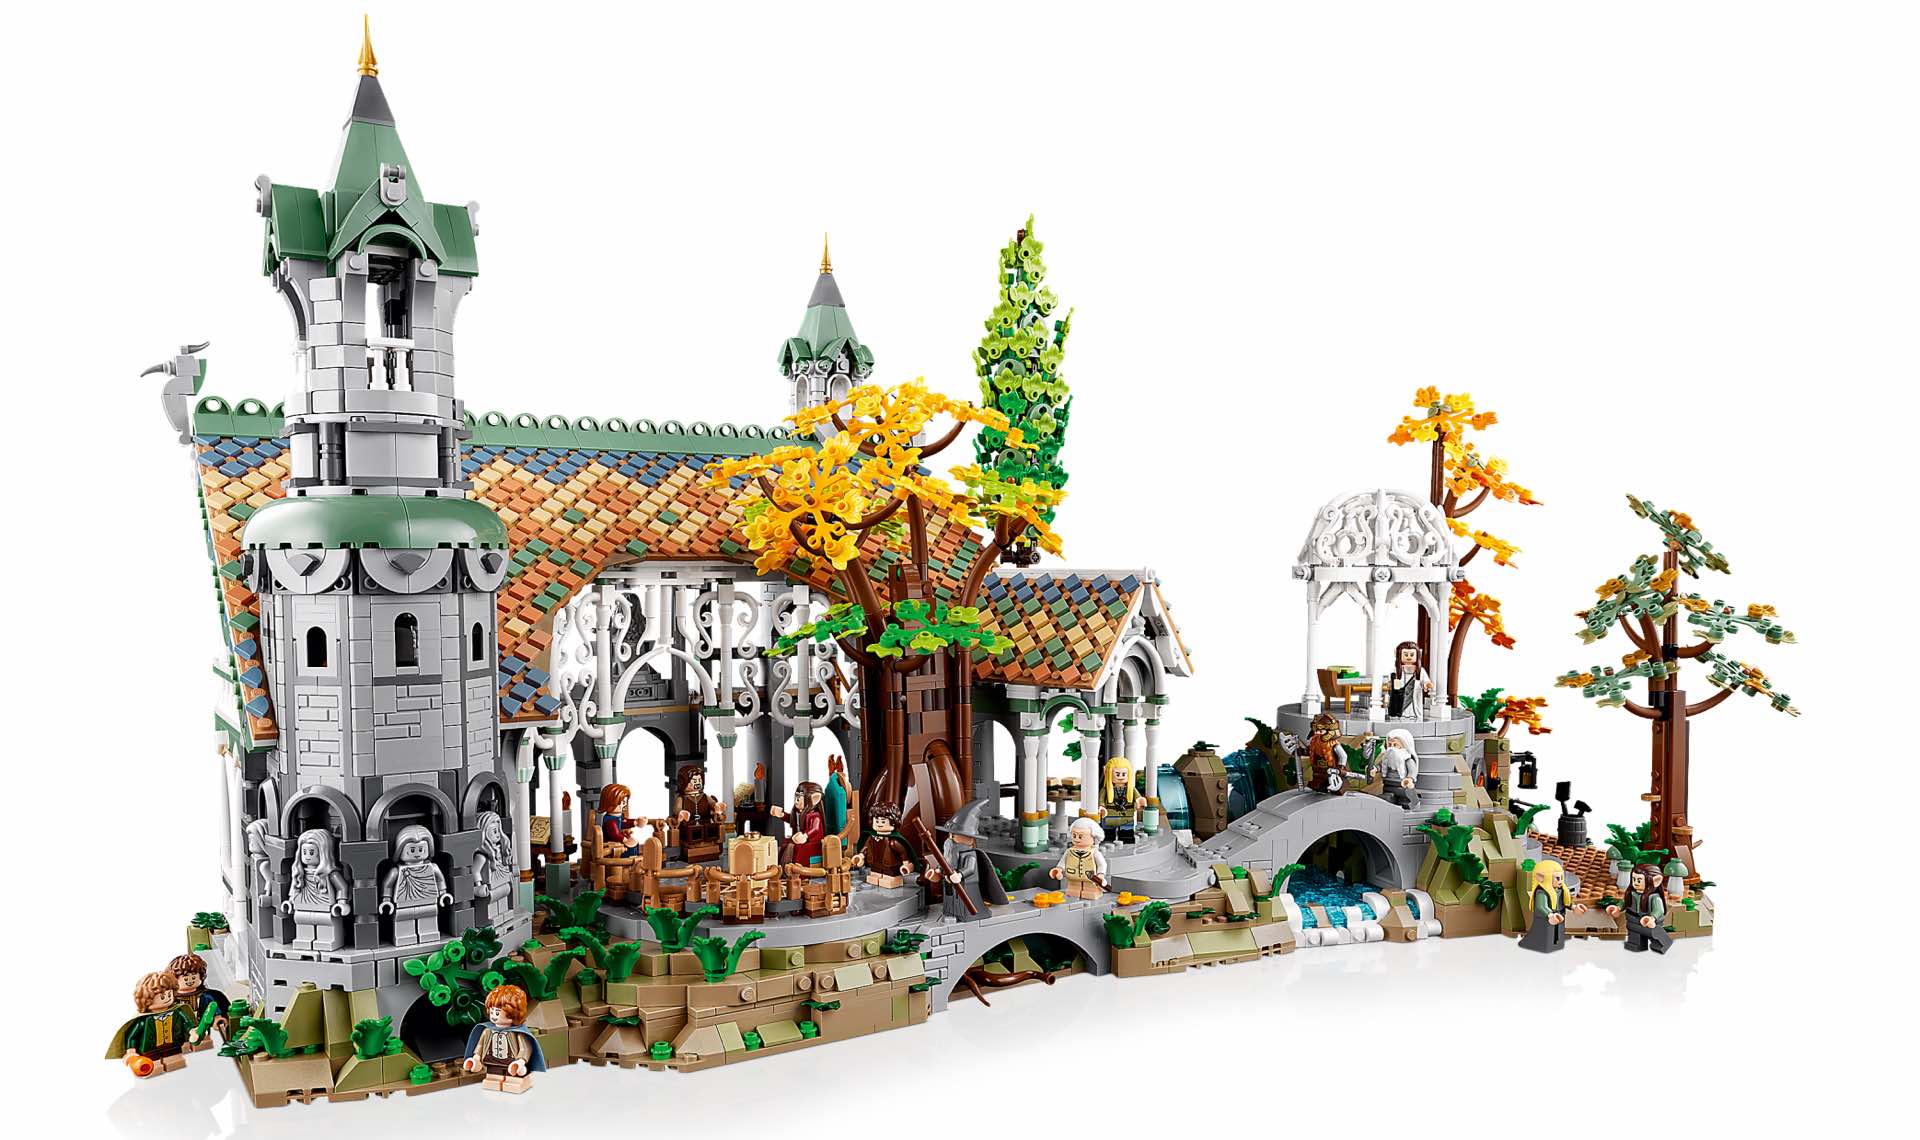 lego-icons-10316-the-lord-of-the-rings-rivendell-building-model-kit